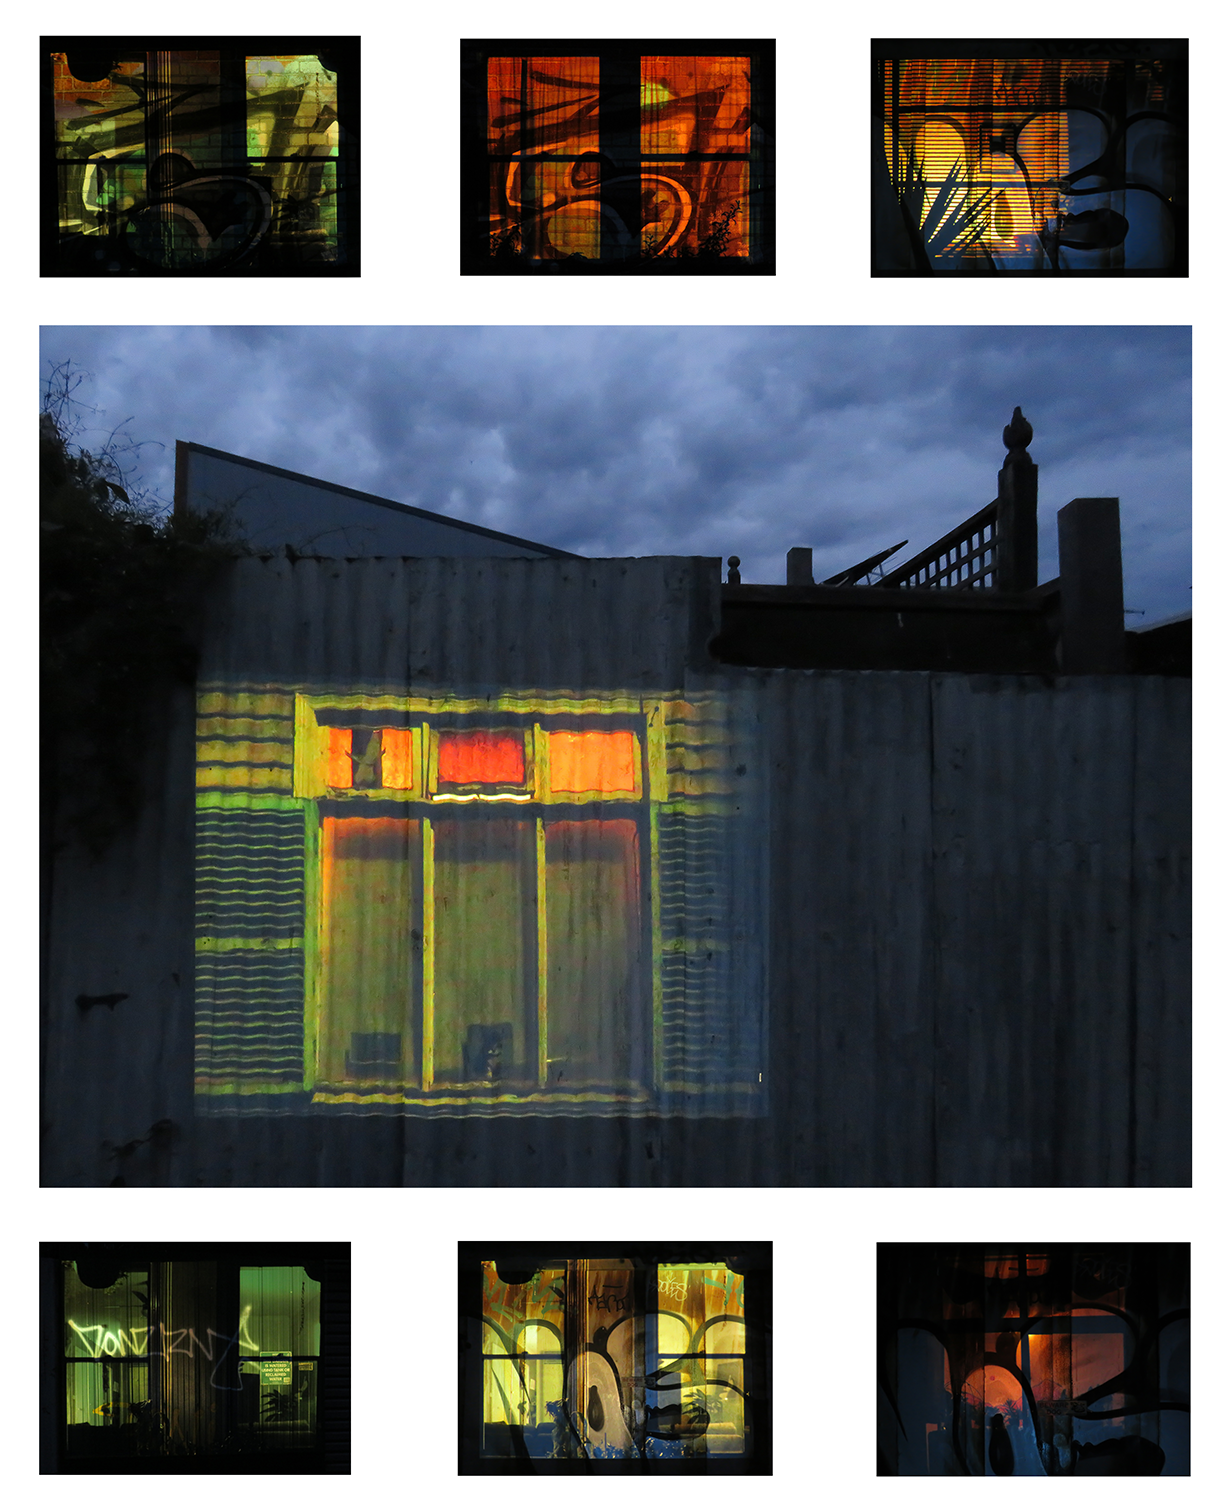 Photographs of windows projected onto urban surfaces at Dusk.